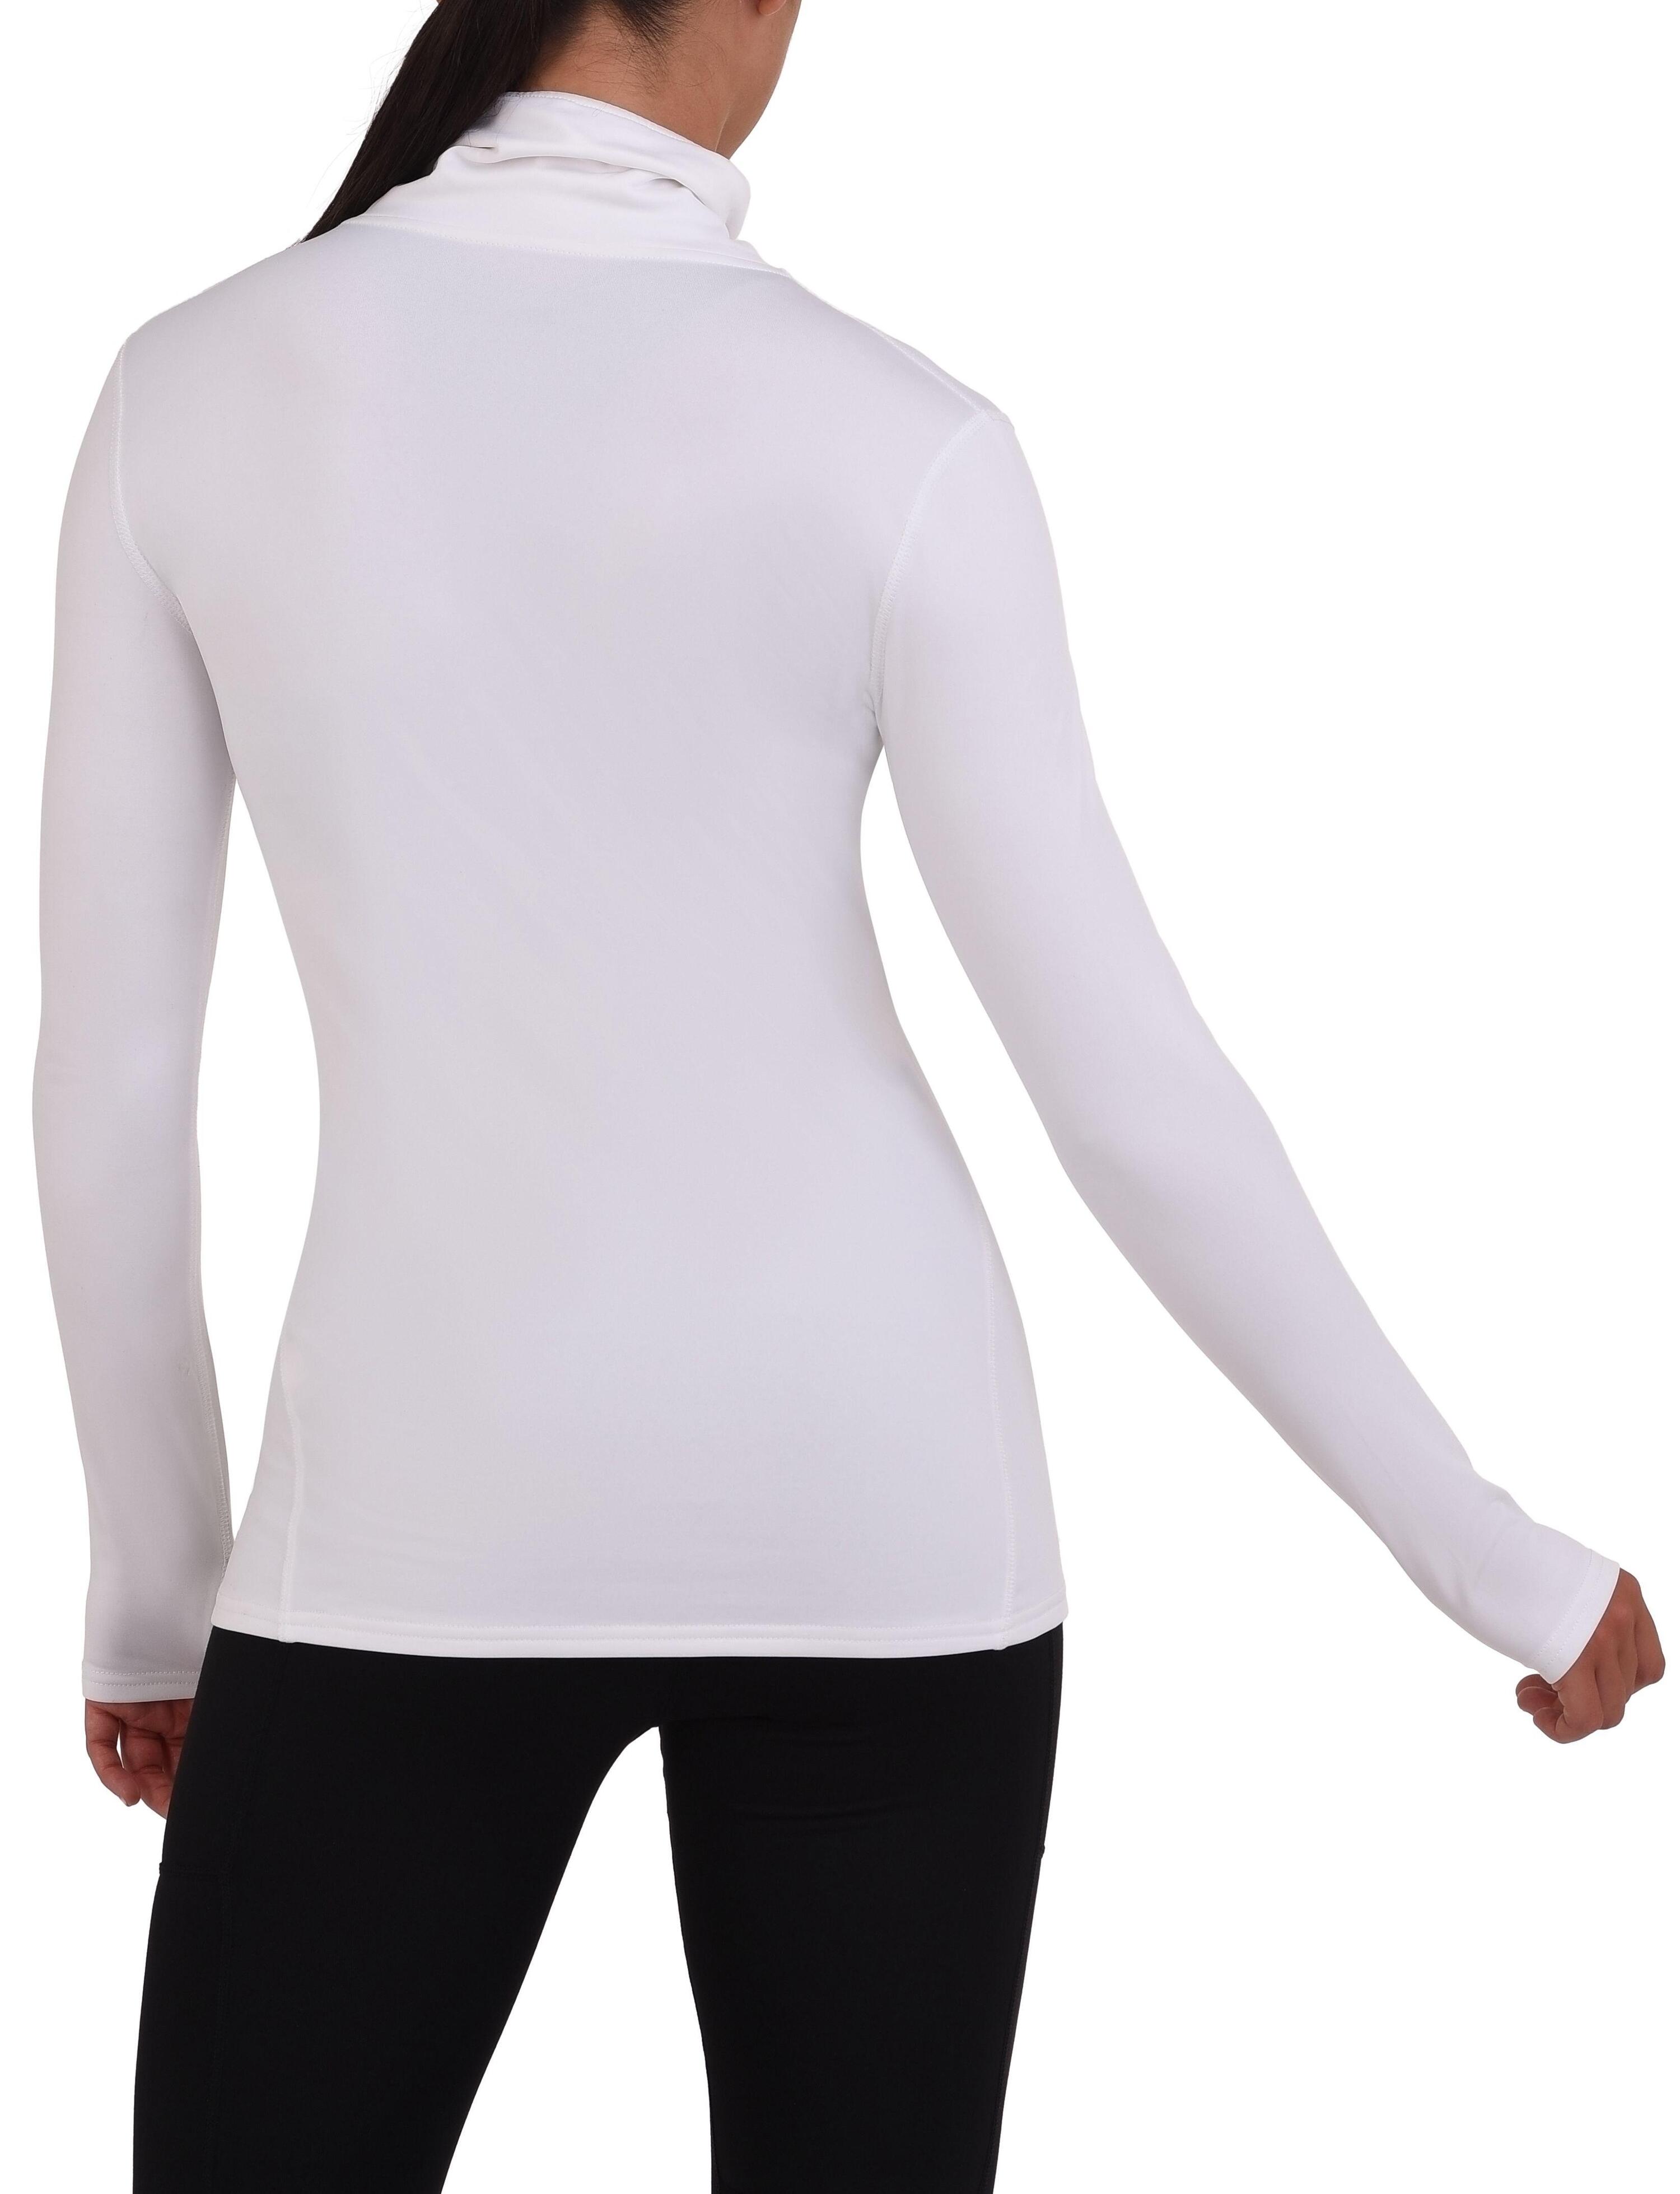 Women's Thermal Funnel Neck Top - White 3/4